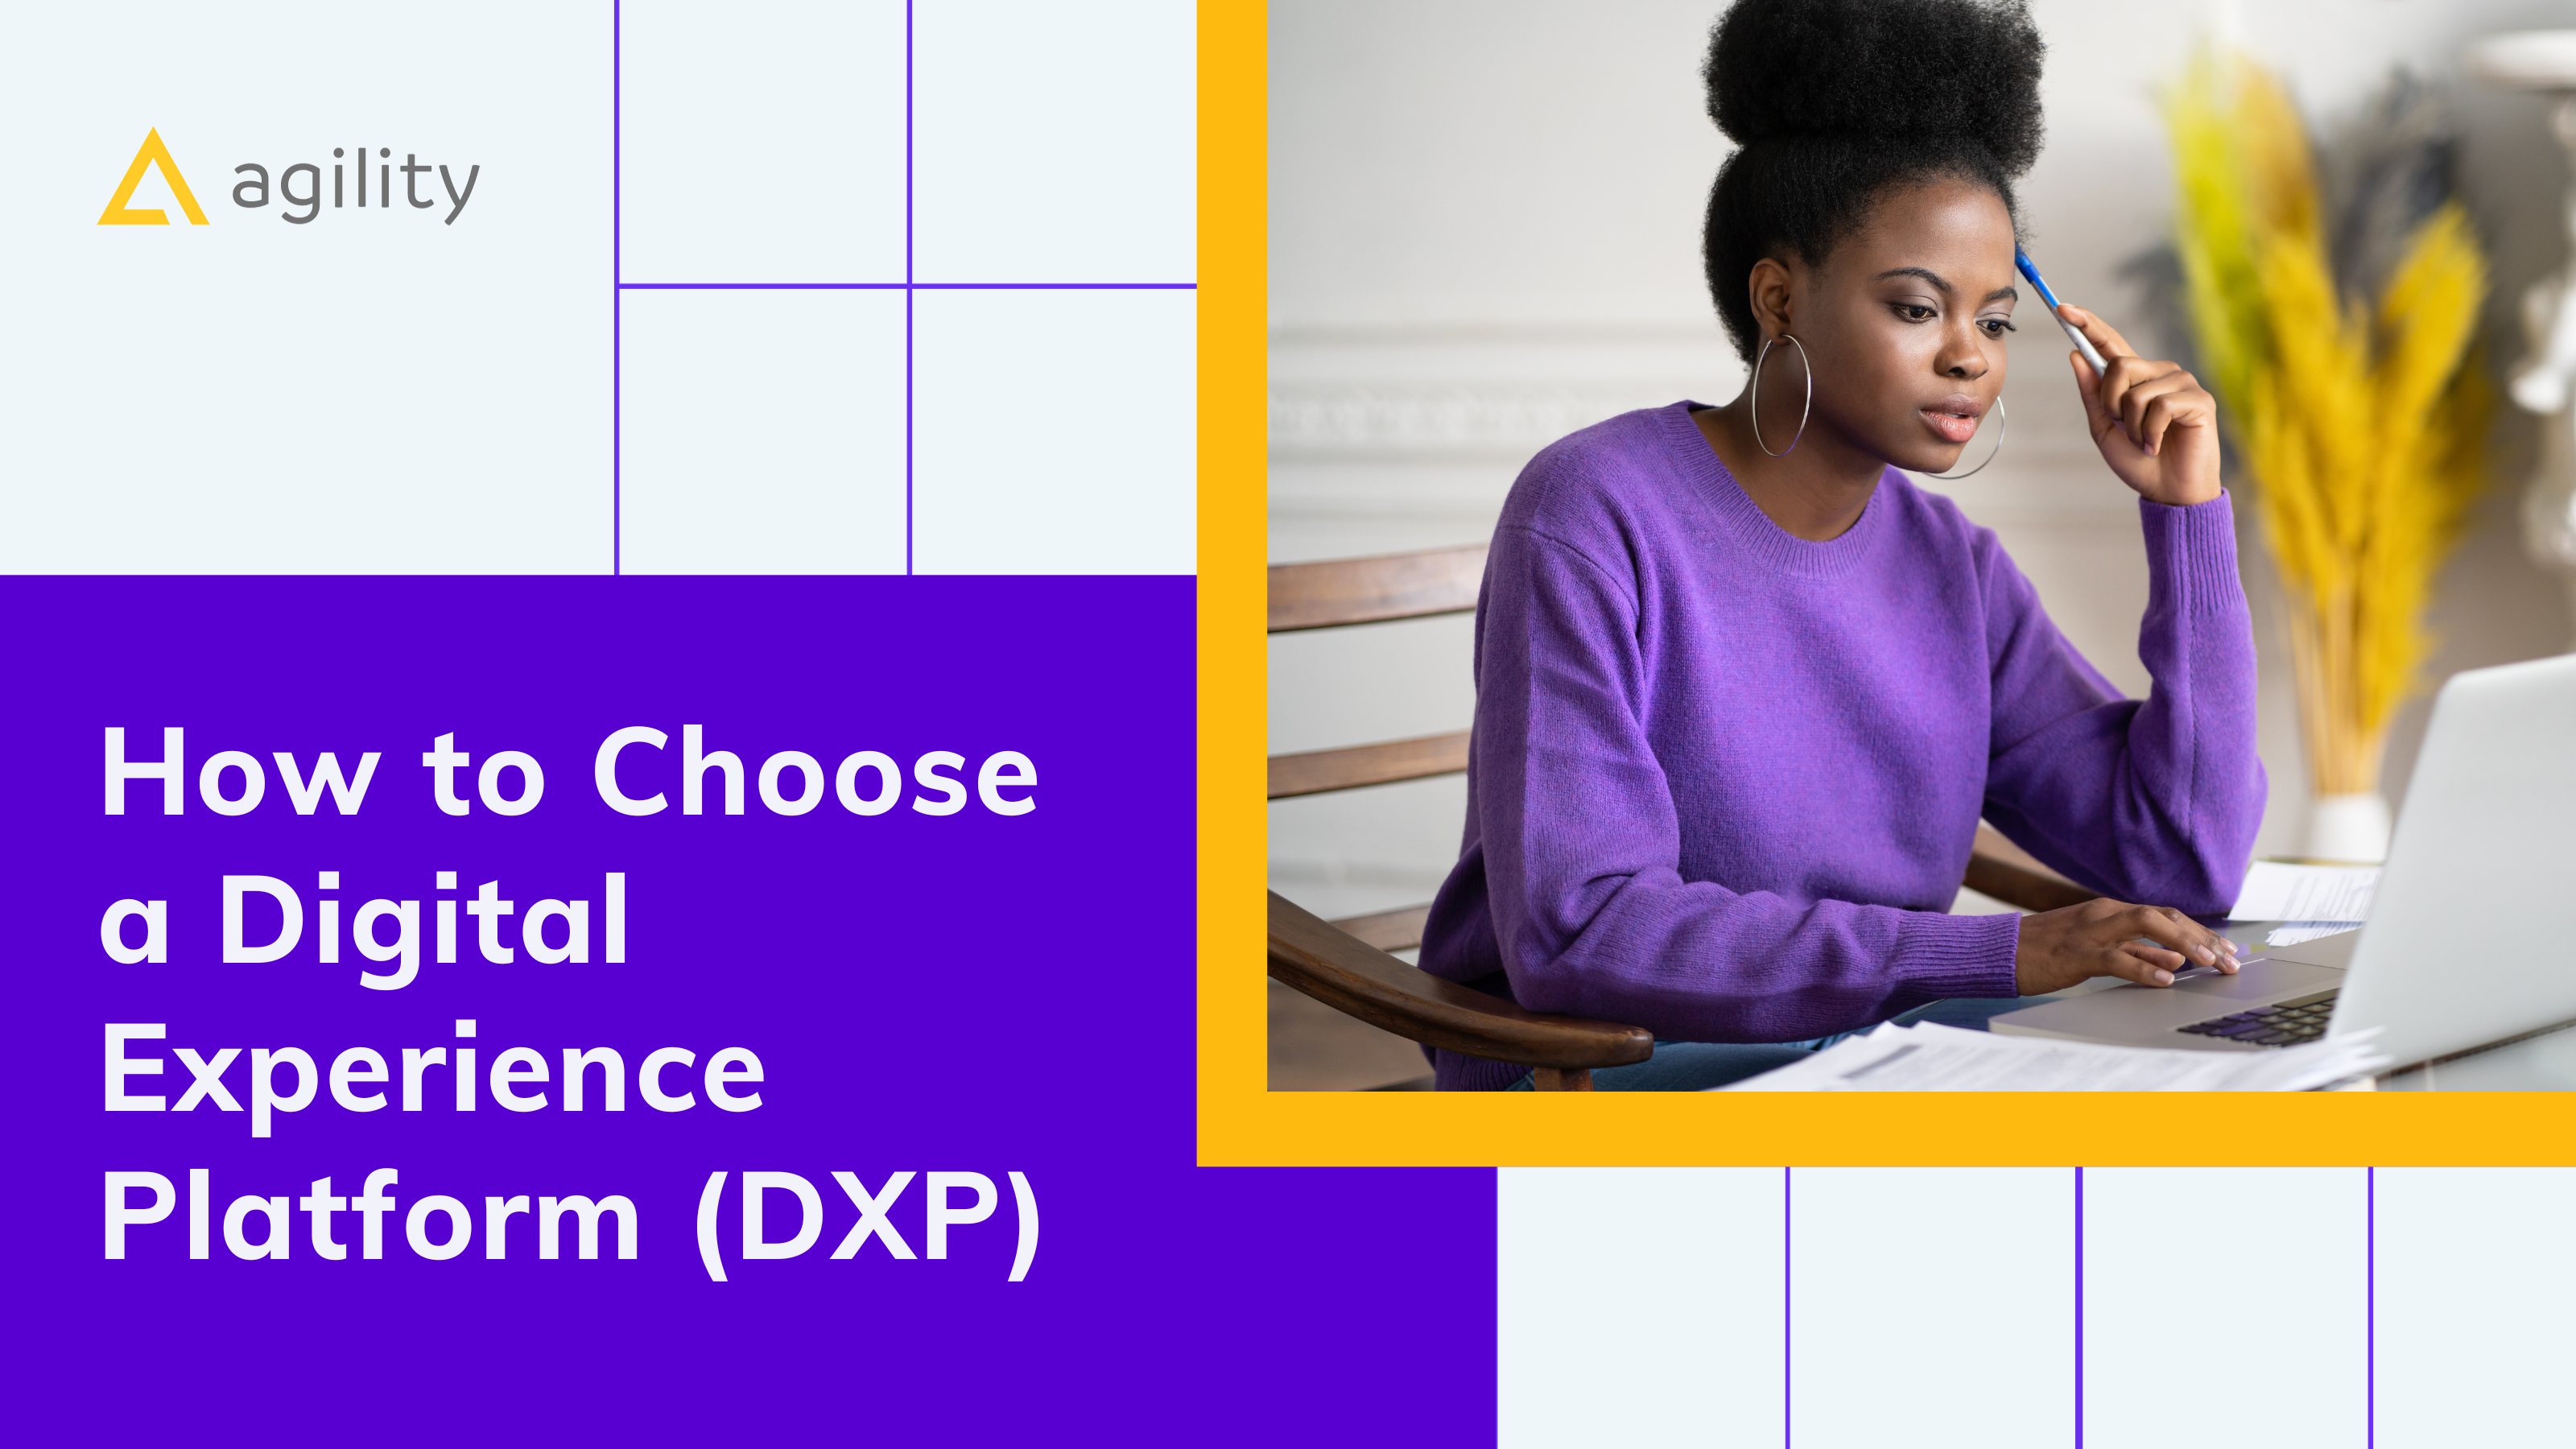 How to choose the right Digital Experience Platform (DXP) 